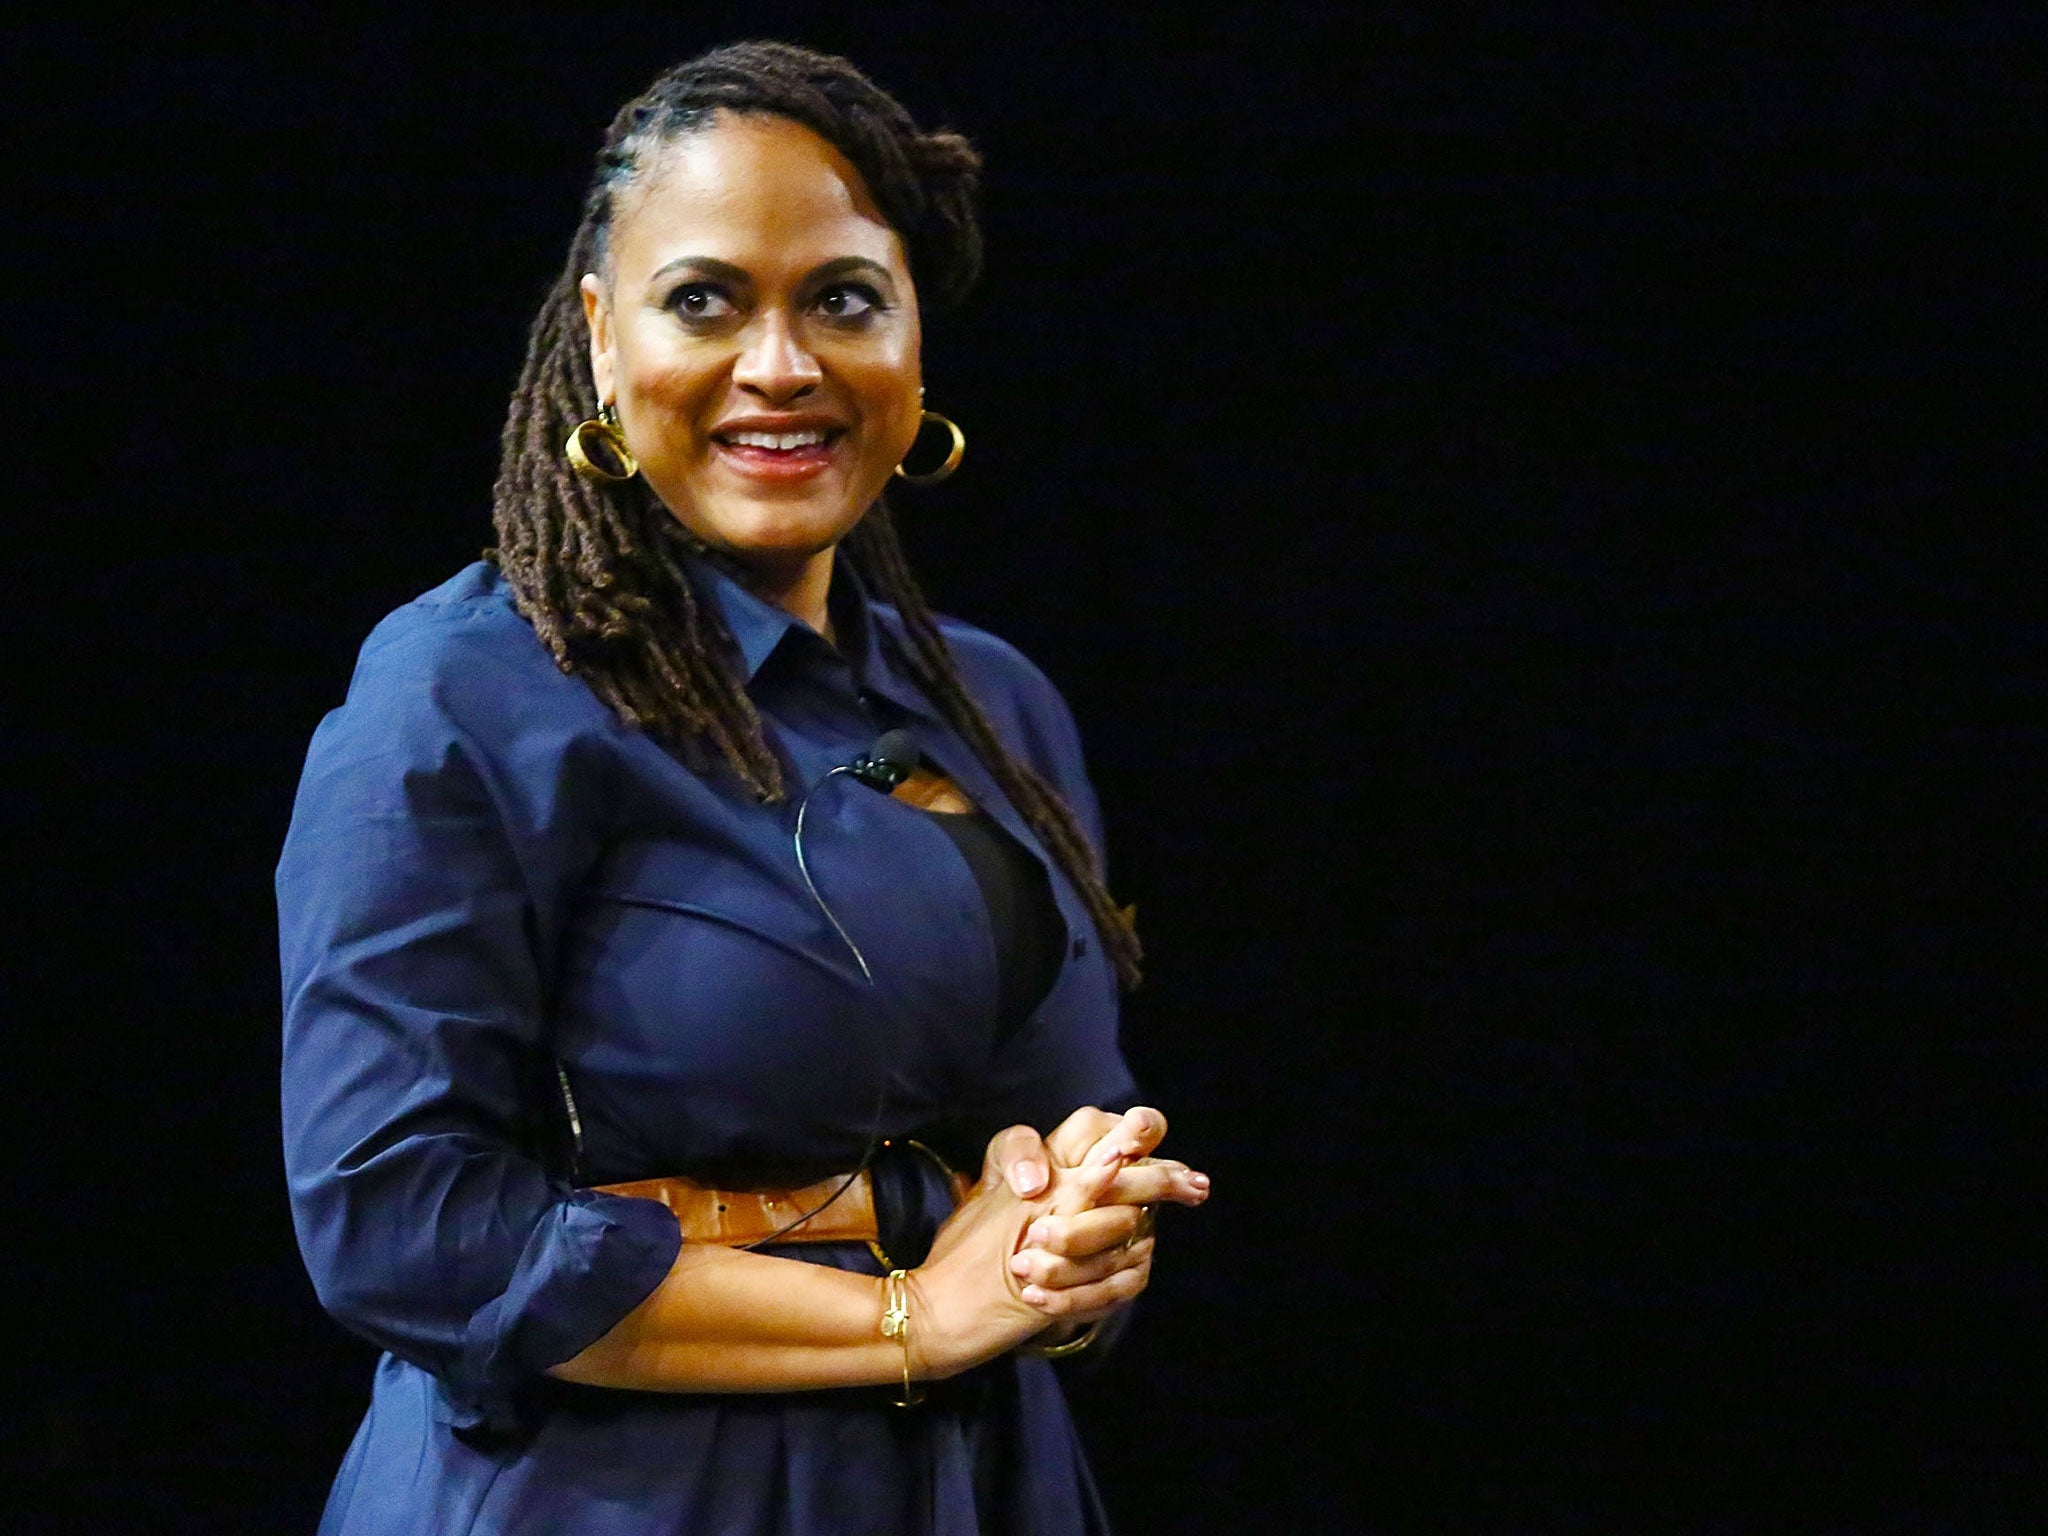 Ava DuVernay is favourite to direct Marvel's first minority-led superhero movie, Black Panther